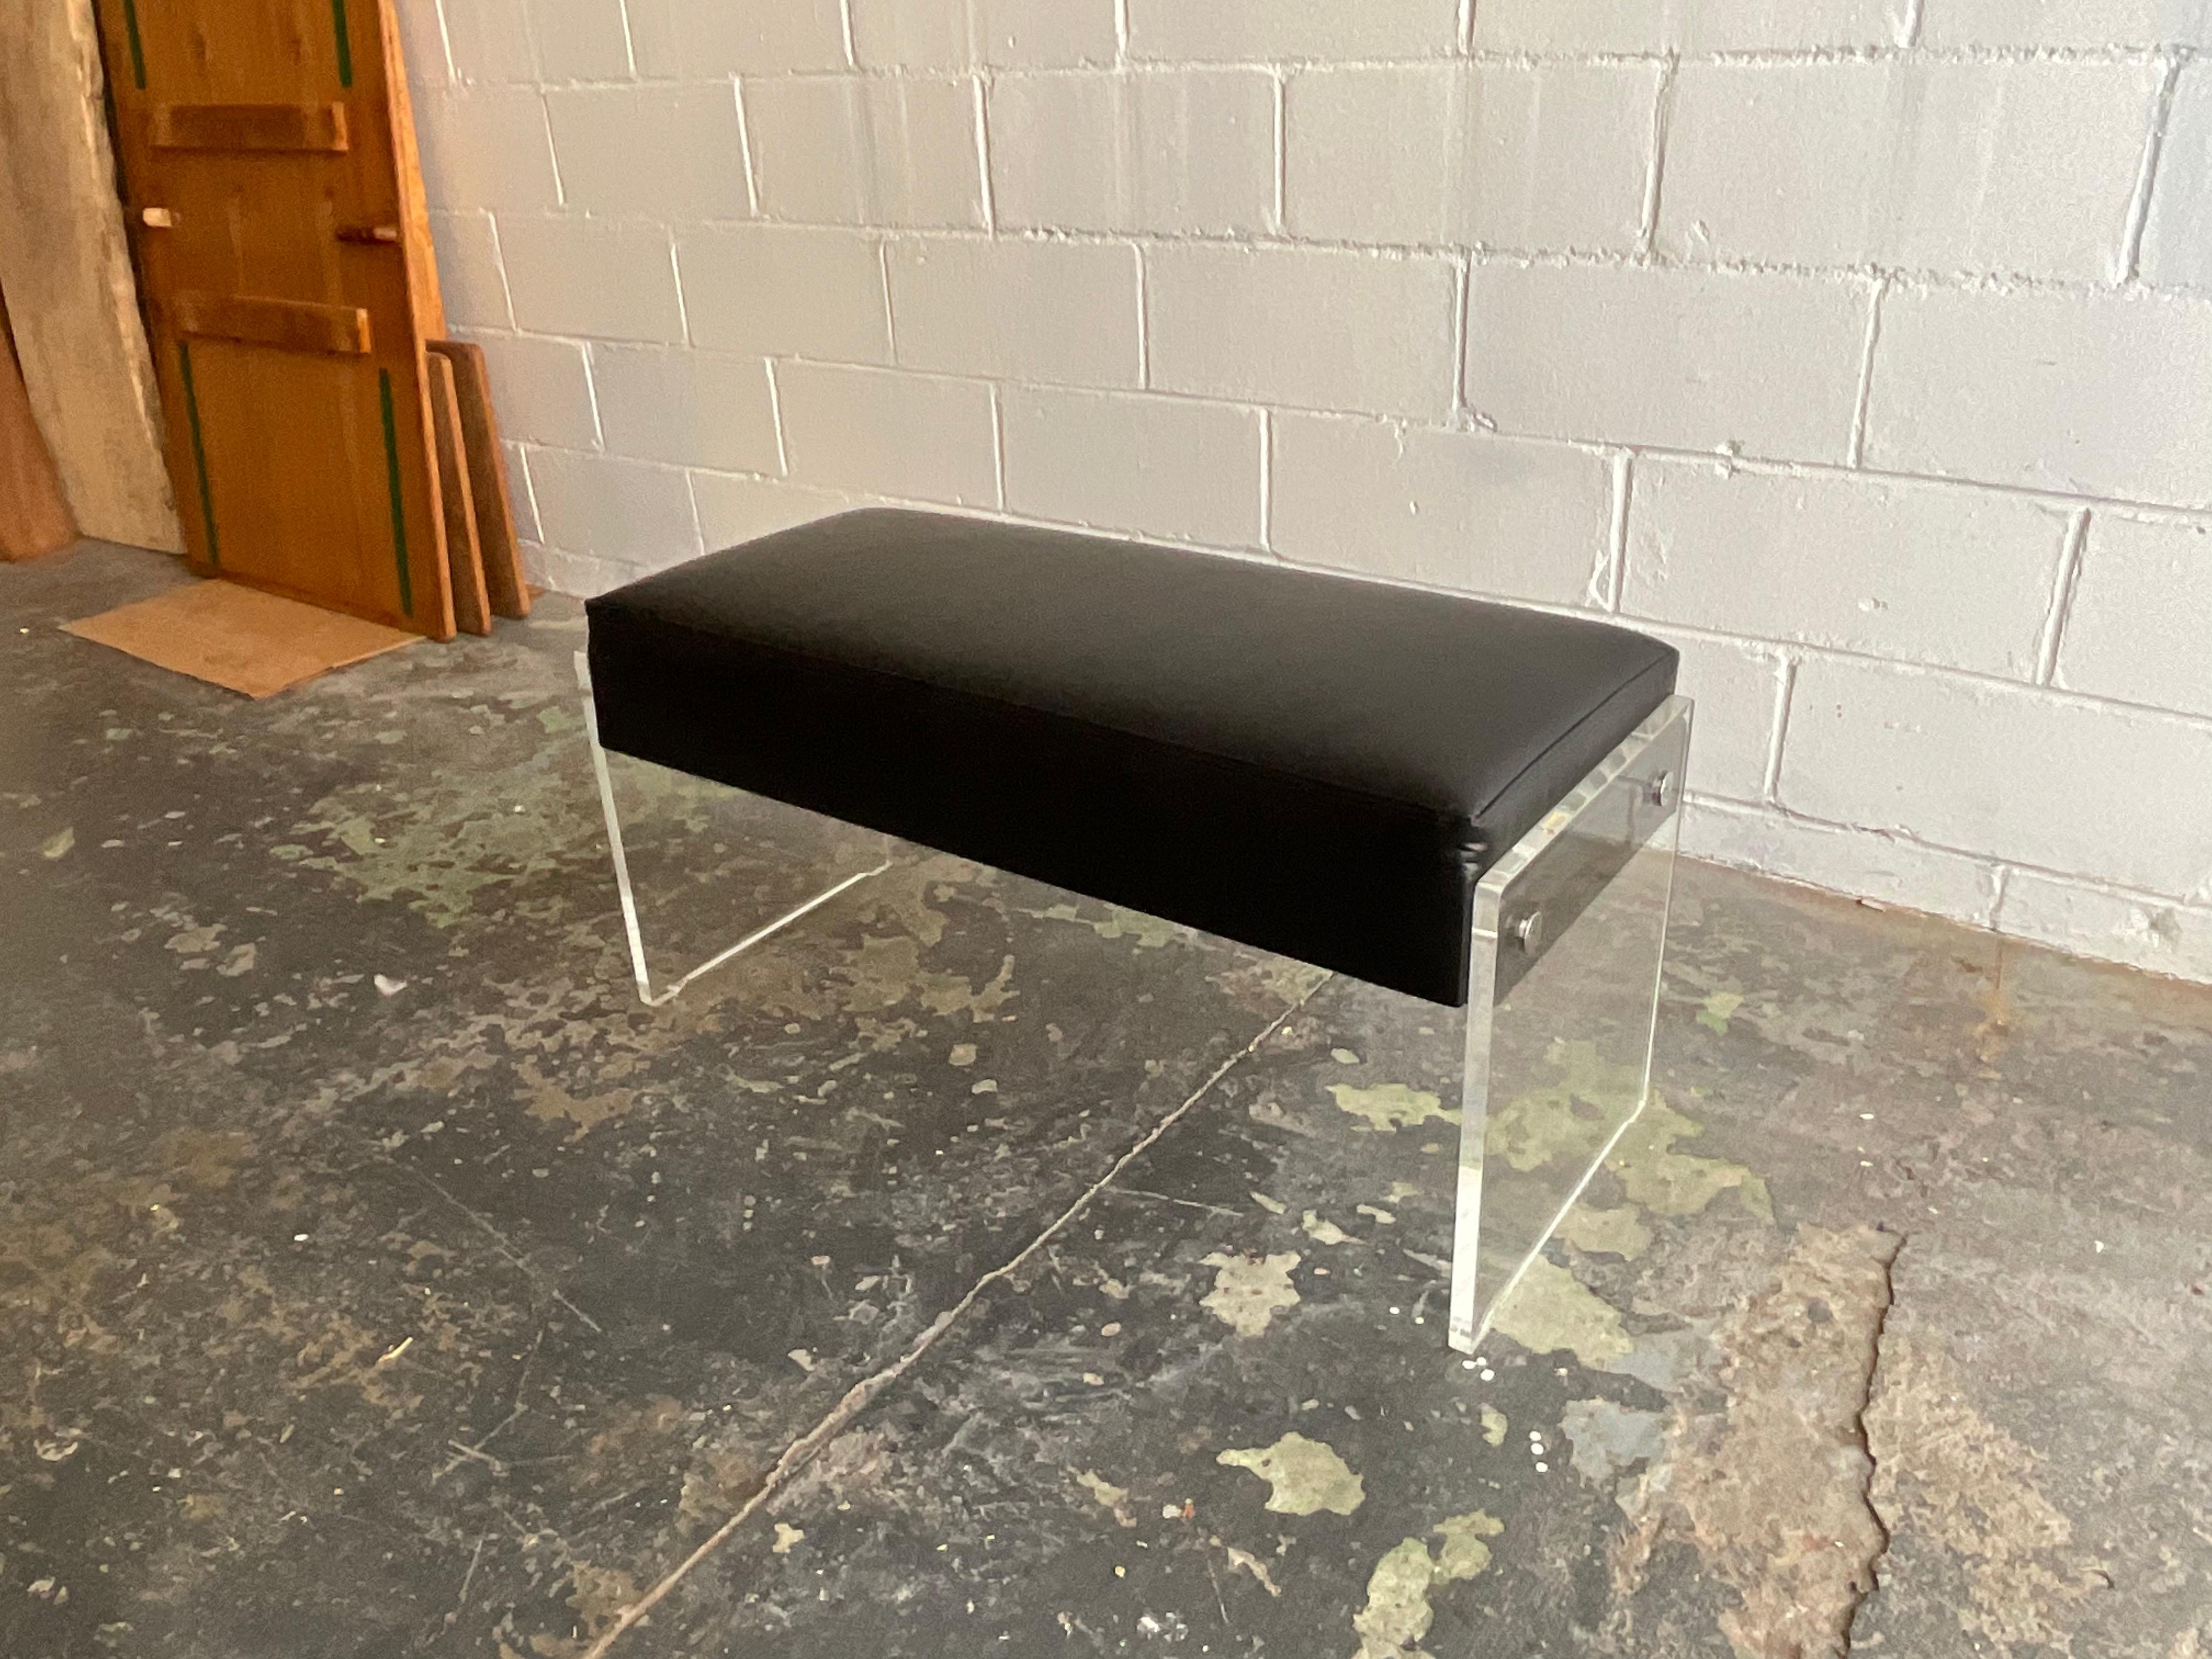 American Vintage Lucite, Chrome & Black Leather Bench with Storage Compartment, 1970s For Sale